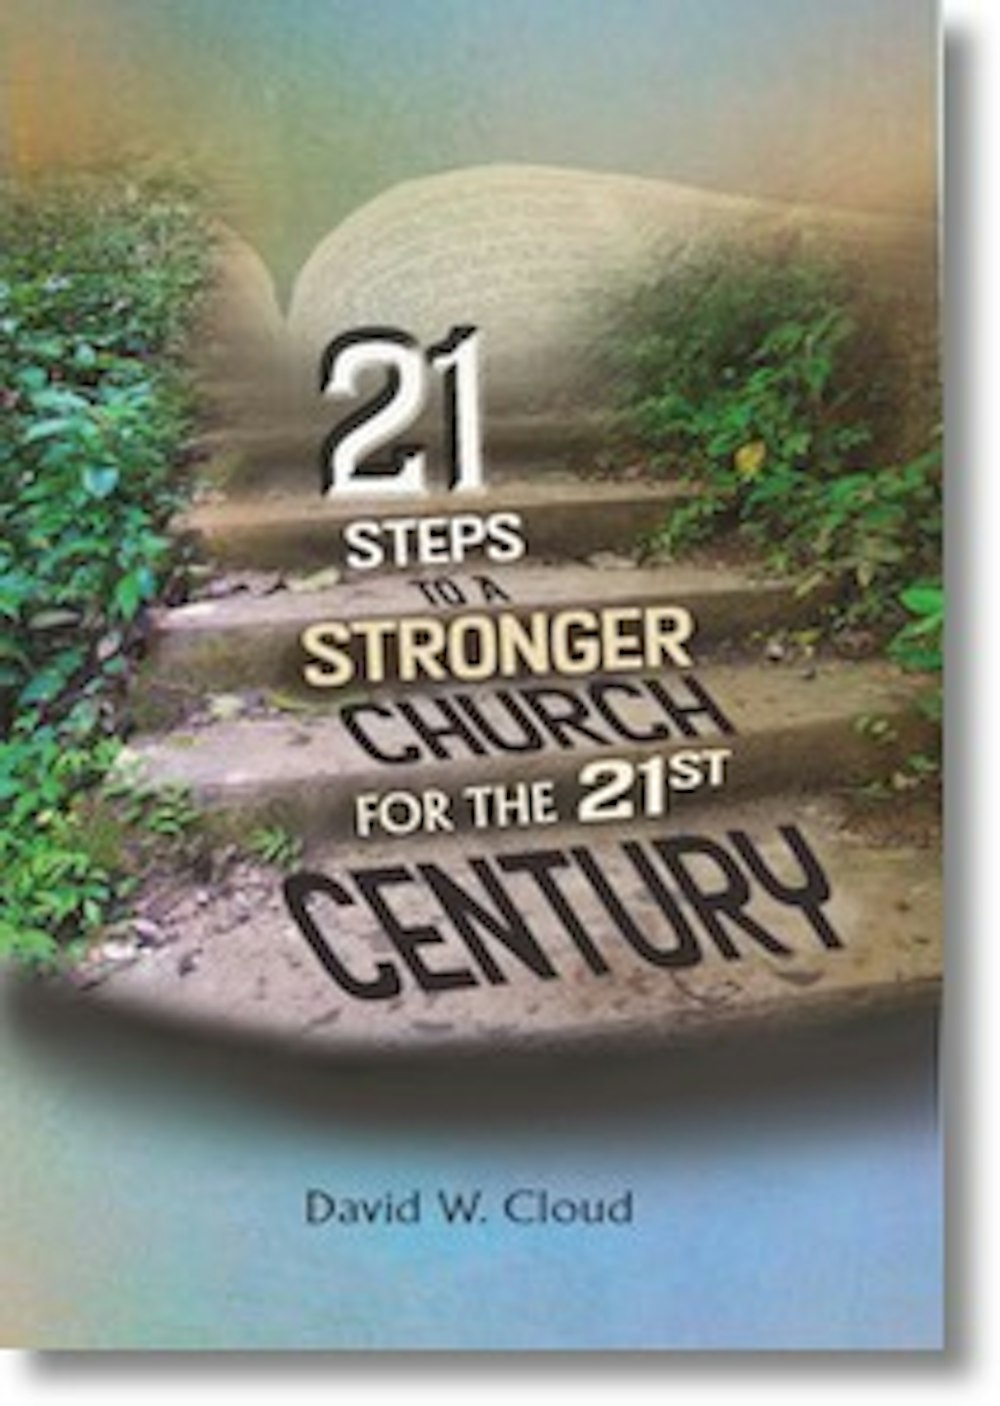 21 Steps to a Stronger Church for the 21st Century